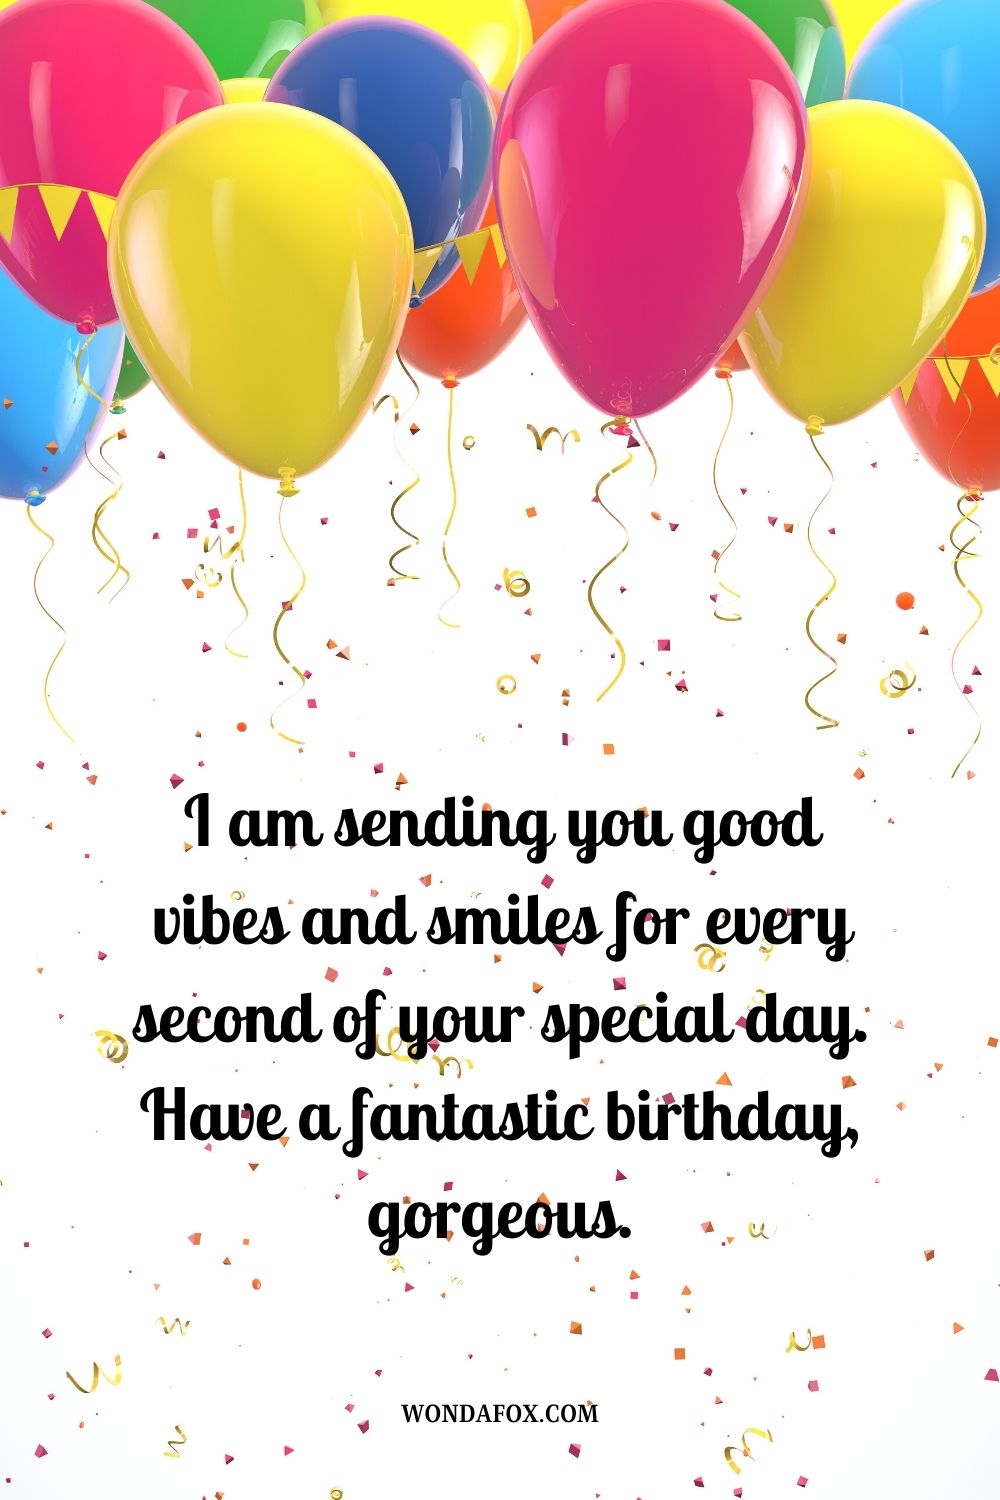 I am sending you good vibes and smiles for every second of your special day. Have a fantastic birthday, gorgeous.